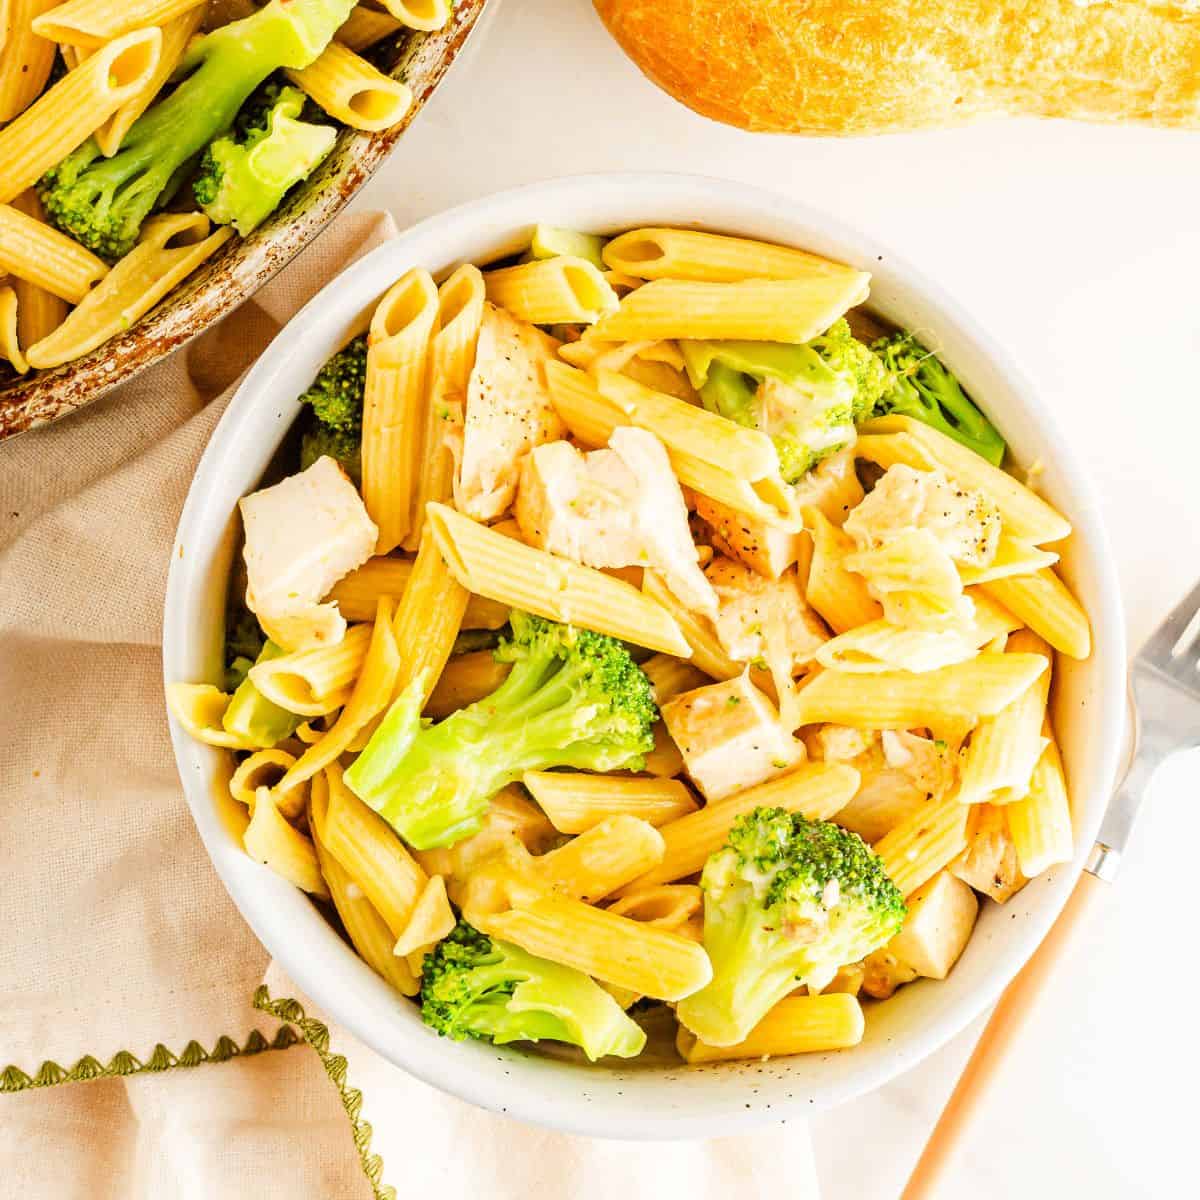 Penne With Chicken and broccoli